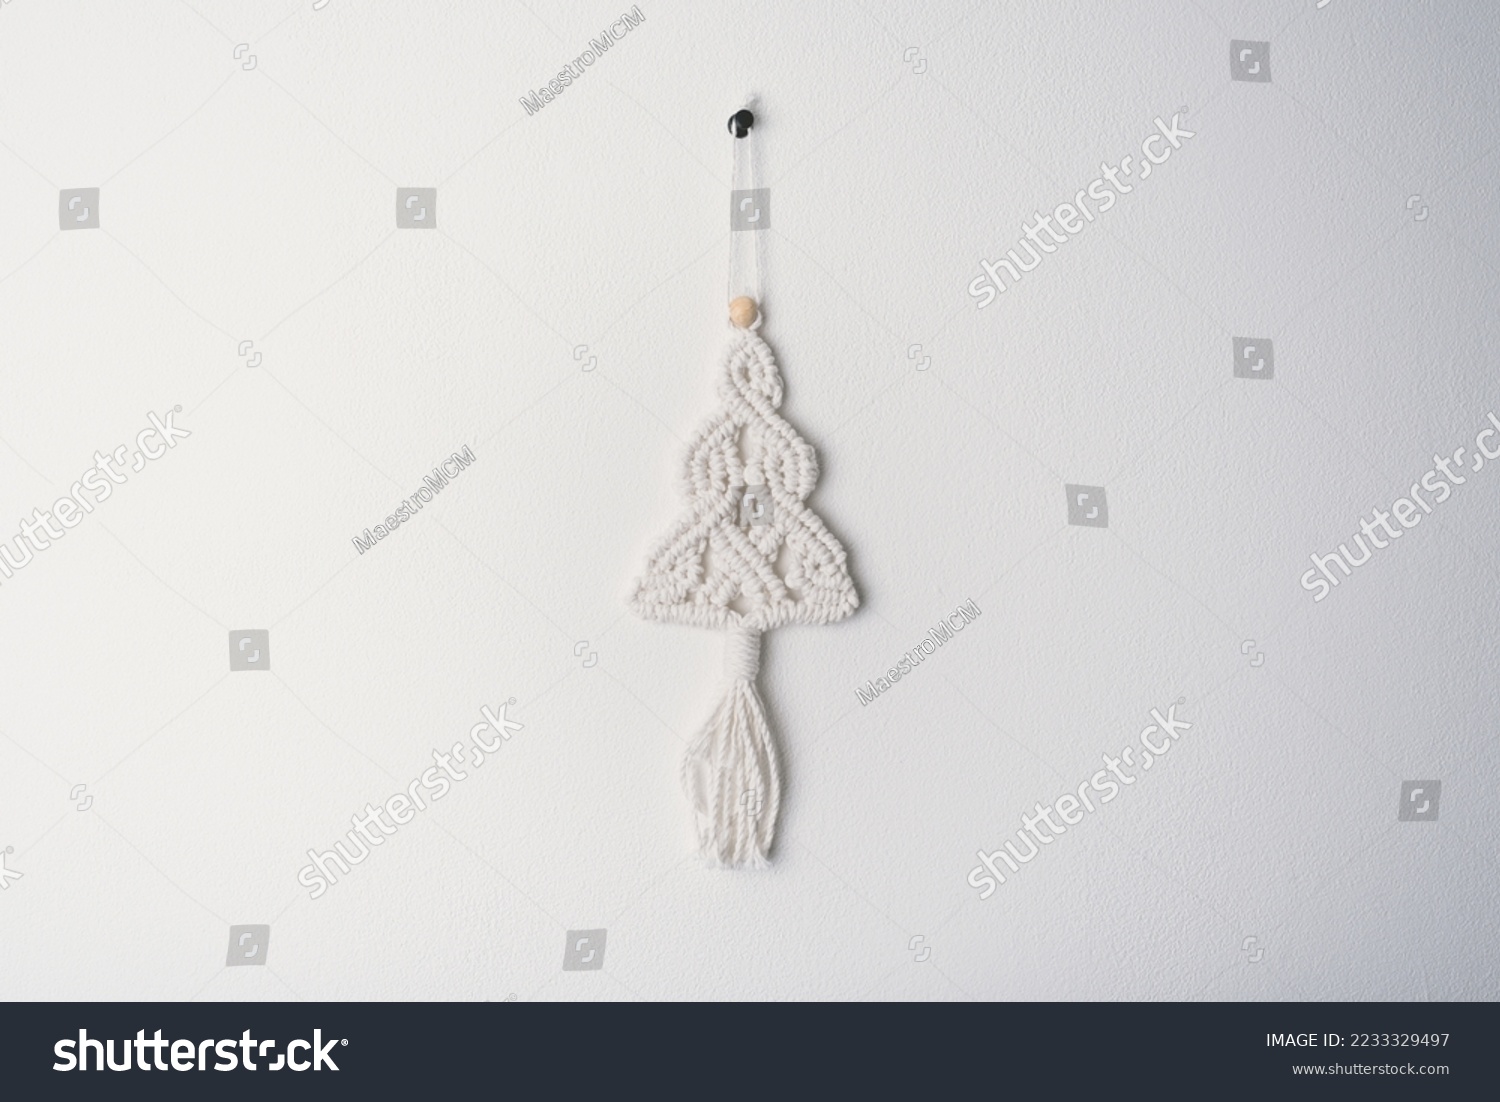 Christmas handmade macrame tree ornament winter holiday, white eco macramé Christmas tree decorations in boho style hanging. tree made from cotton white string pattern on white wall background  #2233329497